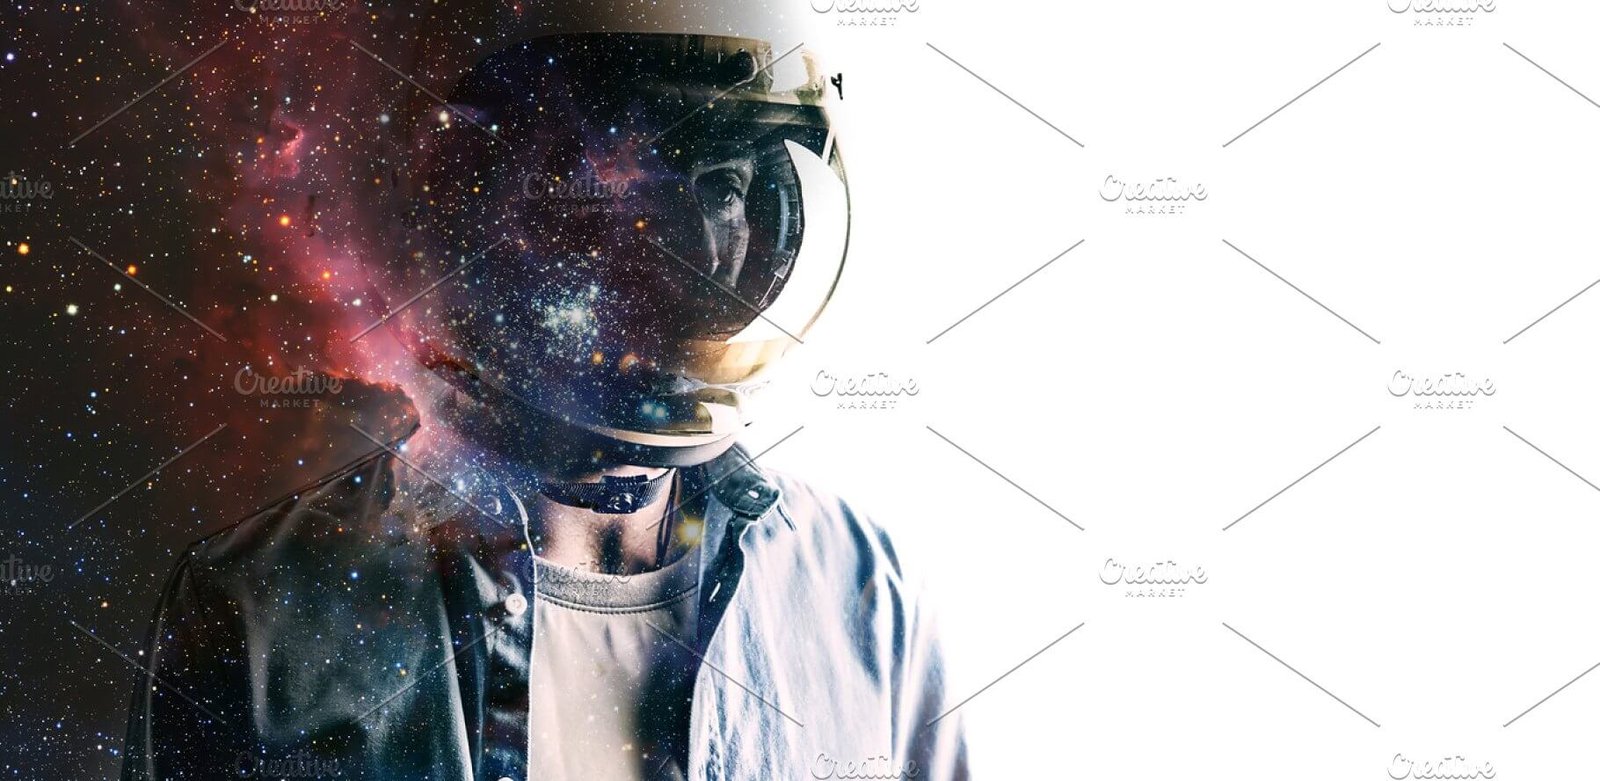 Man In Helmet with Starry Sky Background PSD Mockup